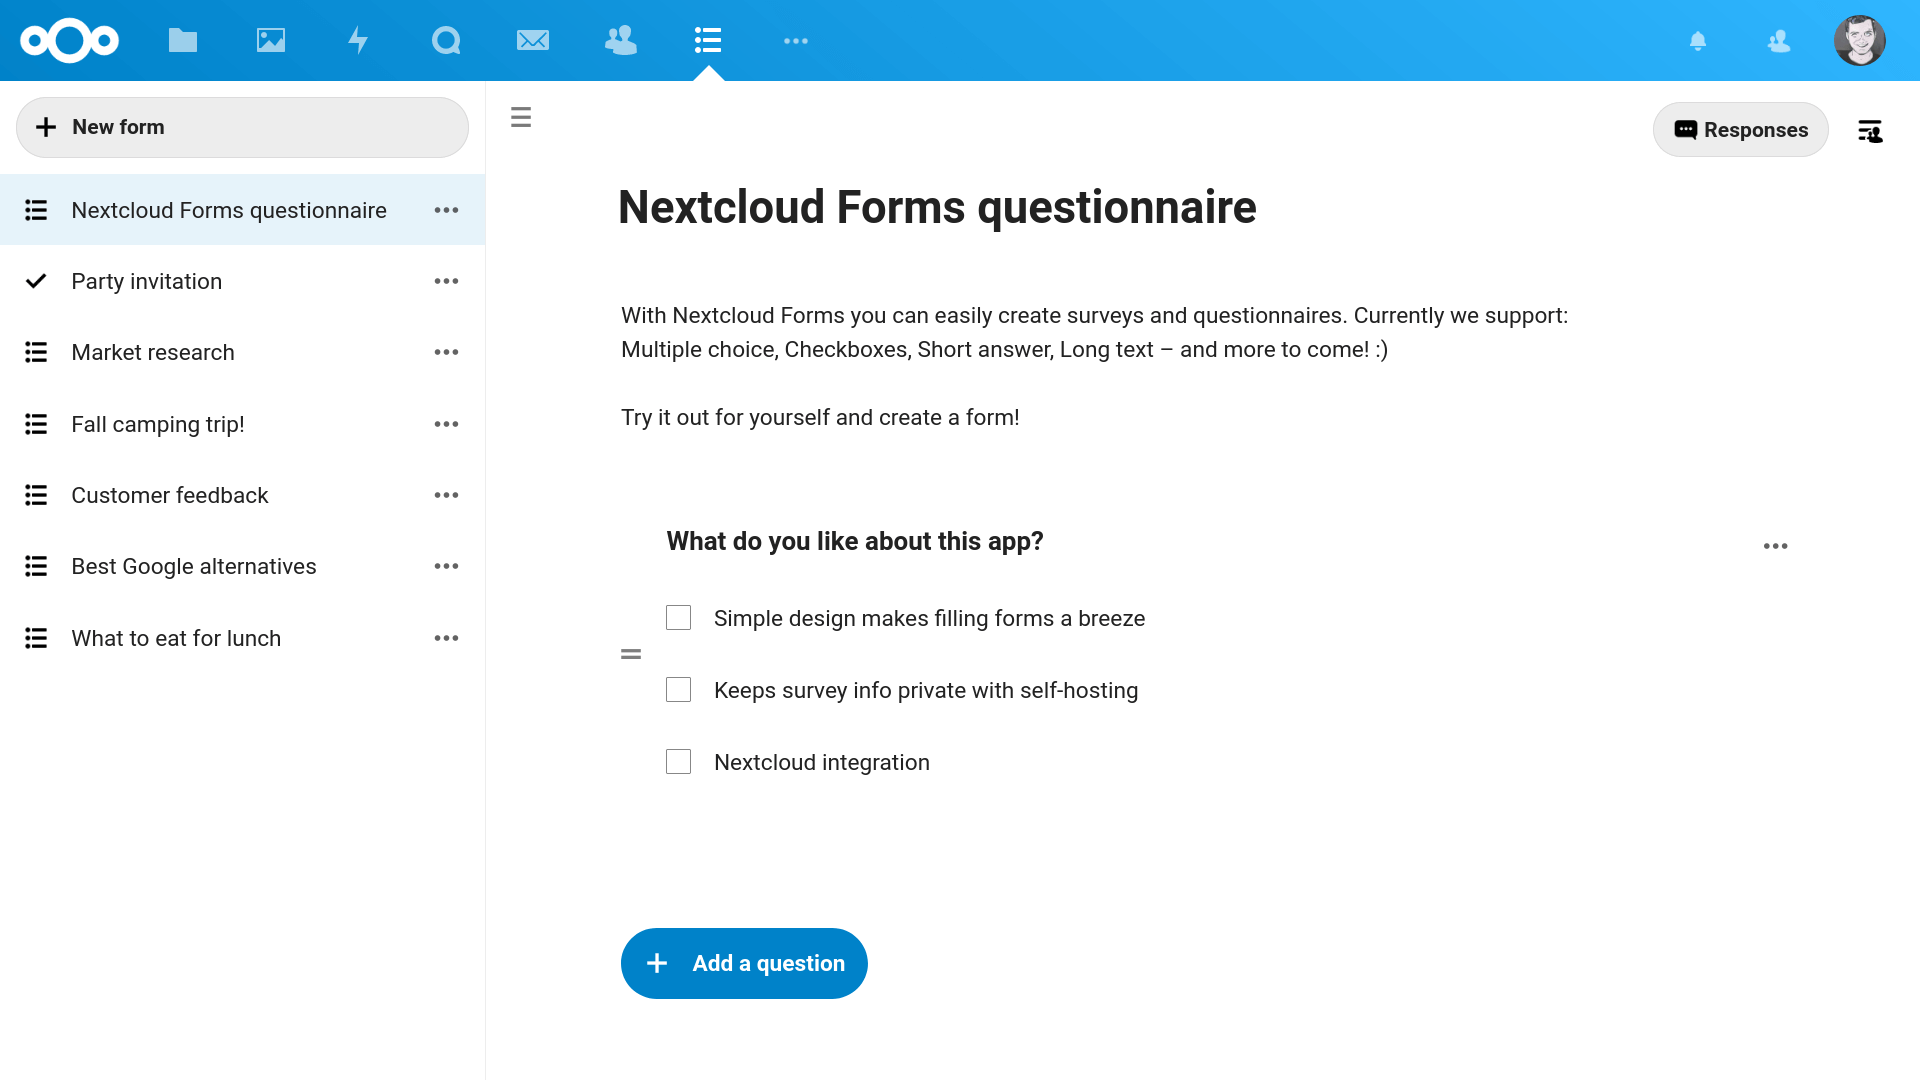 Nextcloud Forms is here to keep your surveys private - Nextcloud